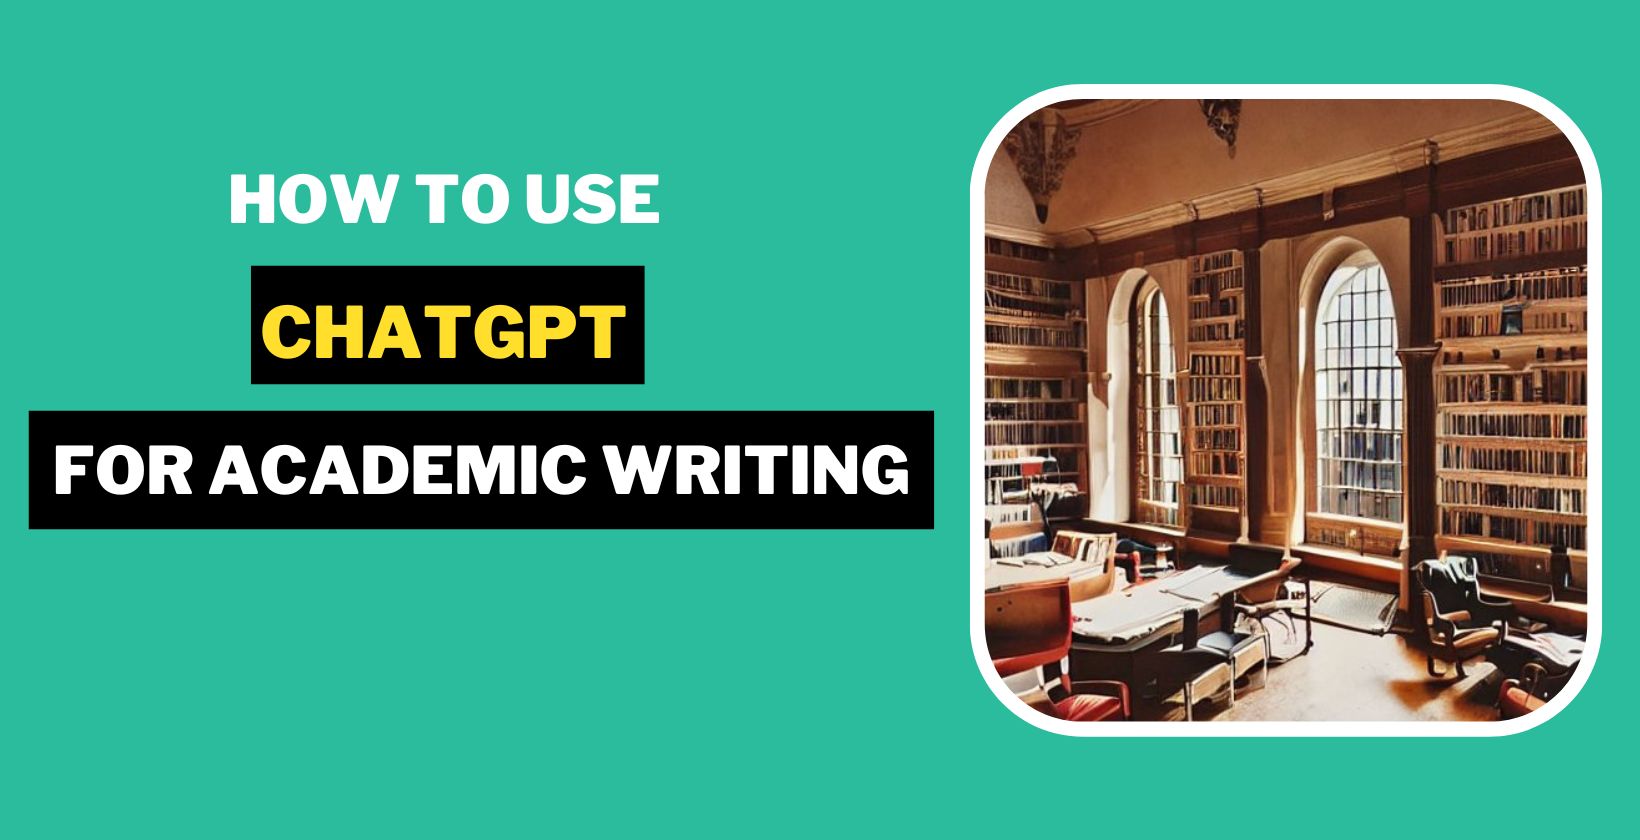 How to Use ChatGPT for Academic Writing